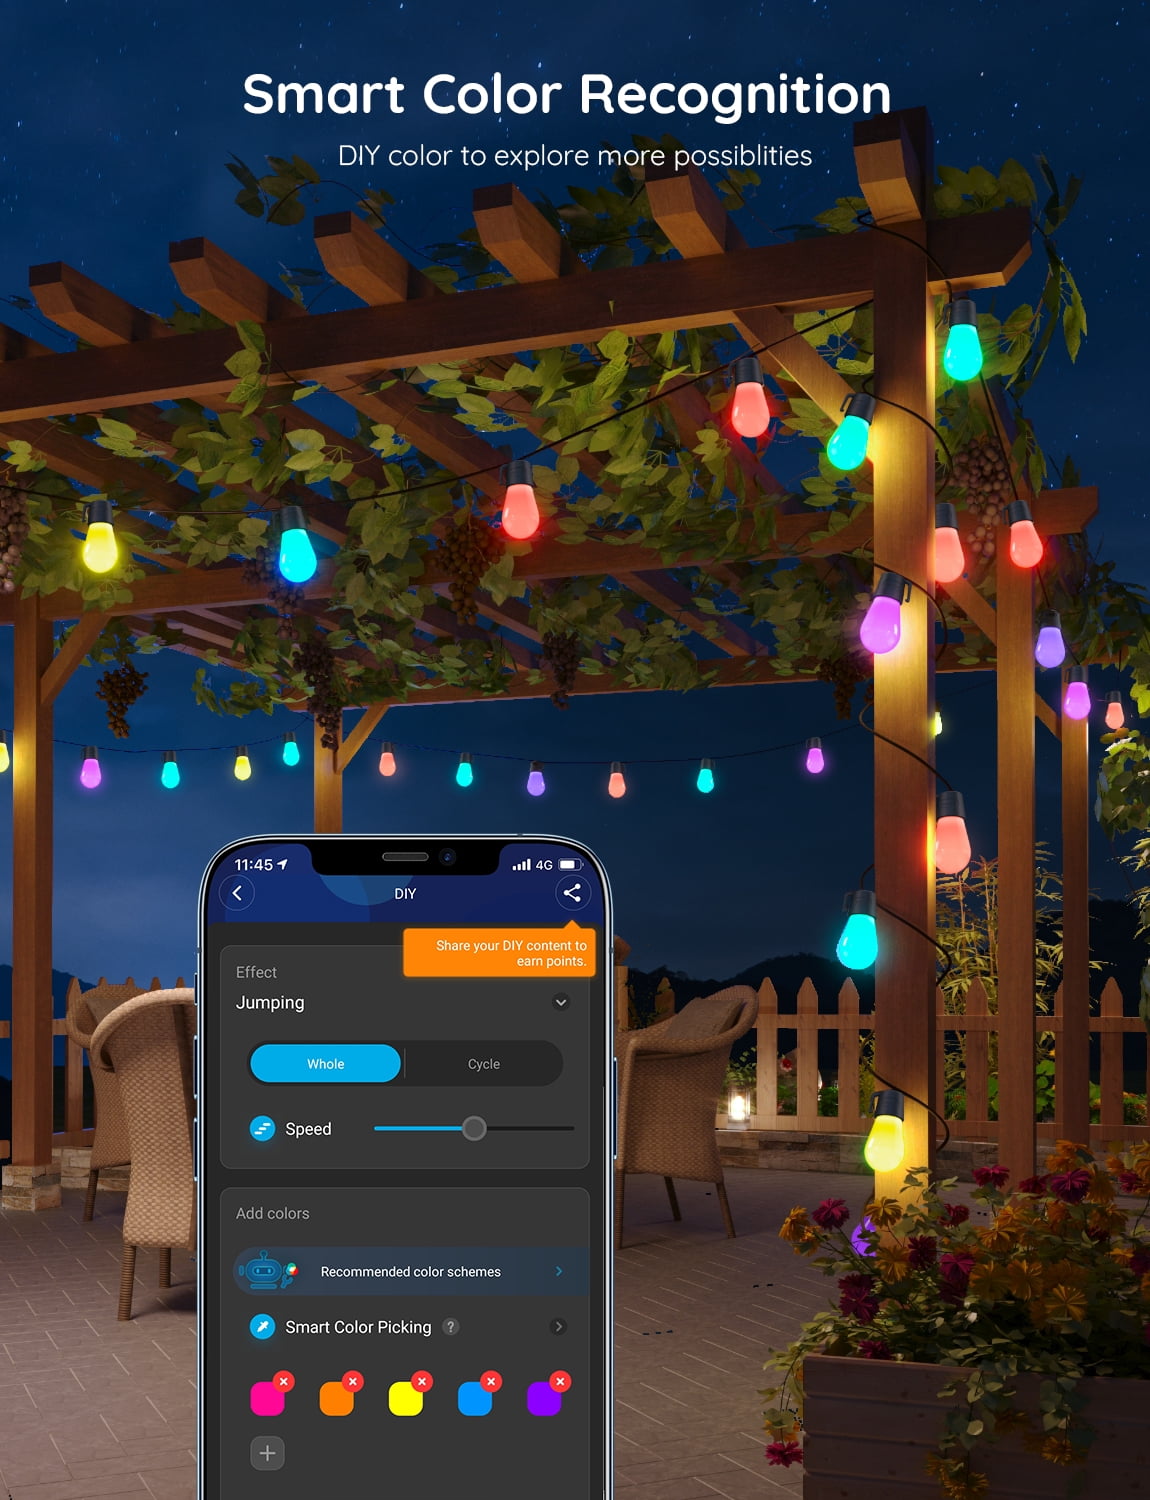 Govee 48-ft Plug-in Multicolor Indoor/Outdoor String Light with 15 Color  Changing-Light LED Edison Bulbs Bluetooth Compatibility Wi-fi Compatibility  in the String Lights department at